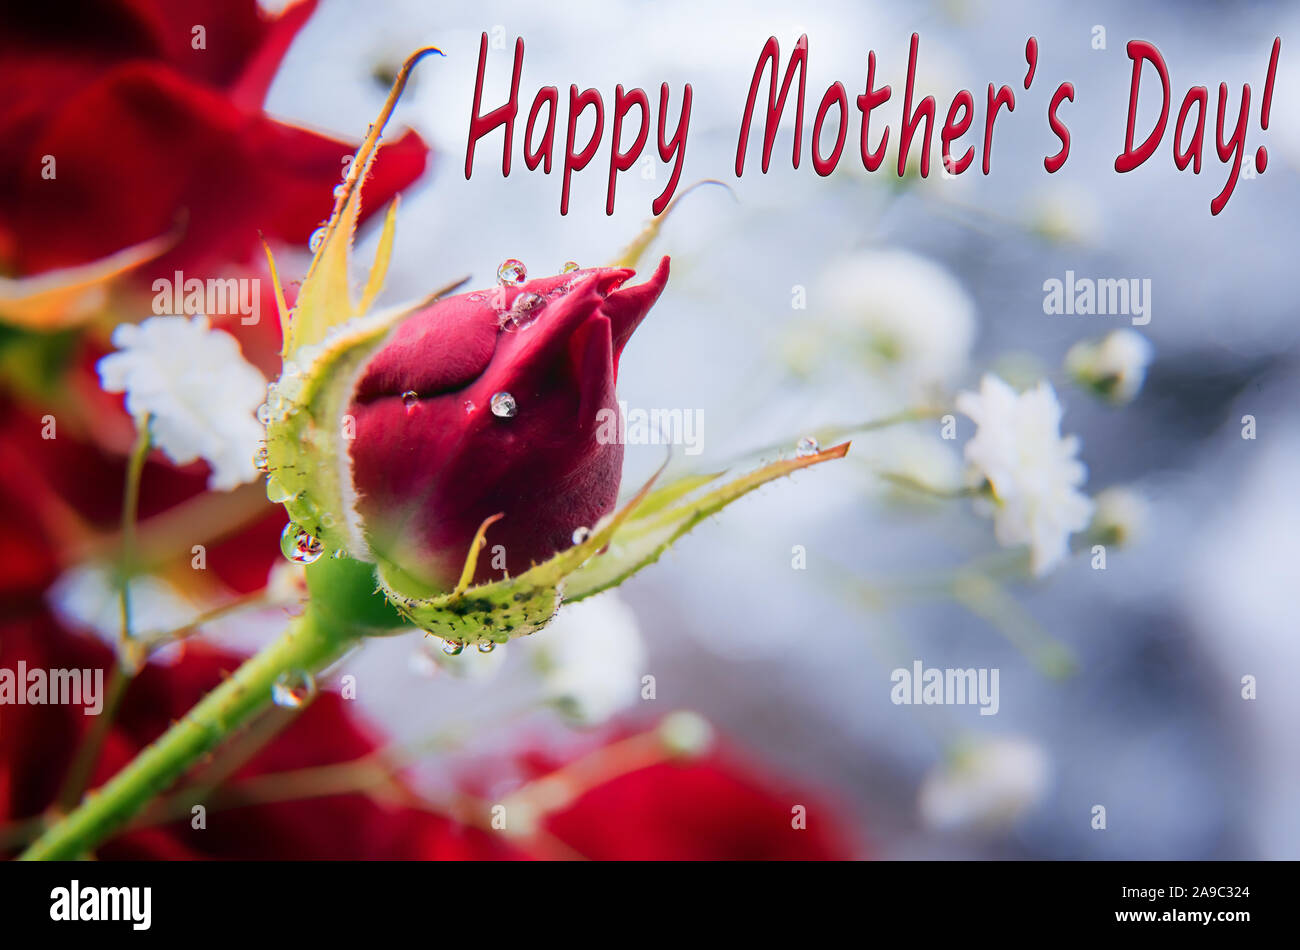 Horizontal greeting card for mother’s day with wish sign. Beautiful red rose bud with shining small water drops. Selective focus. Unfocused red rose a Stock Photo